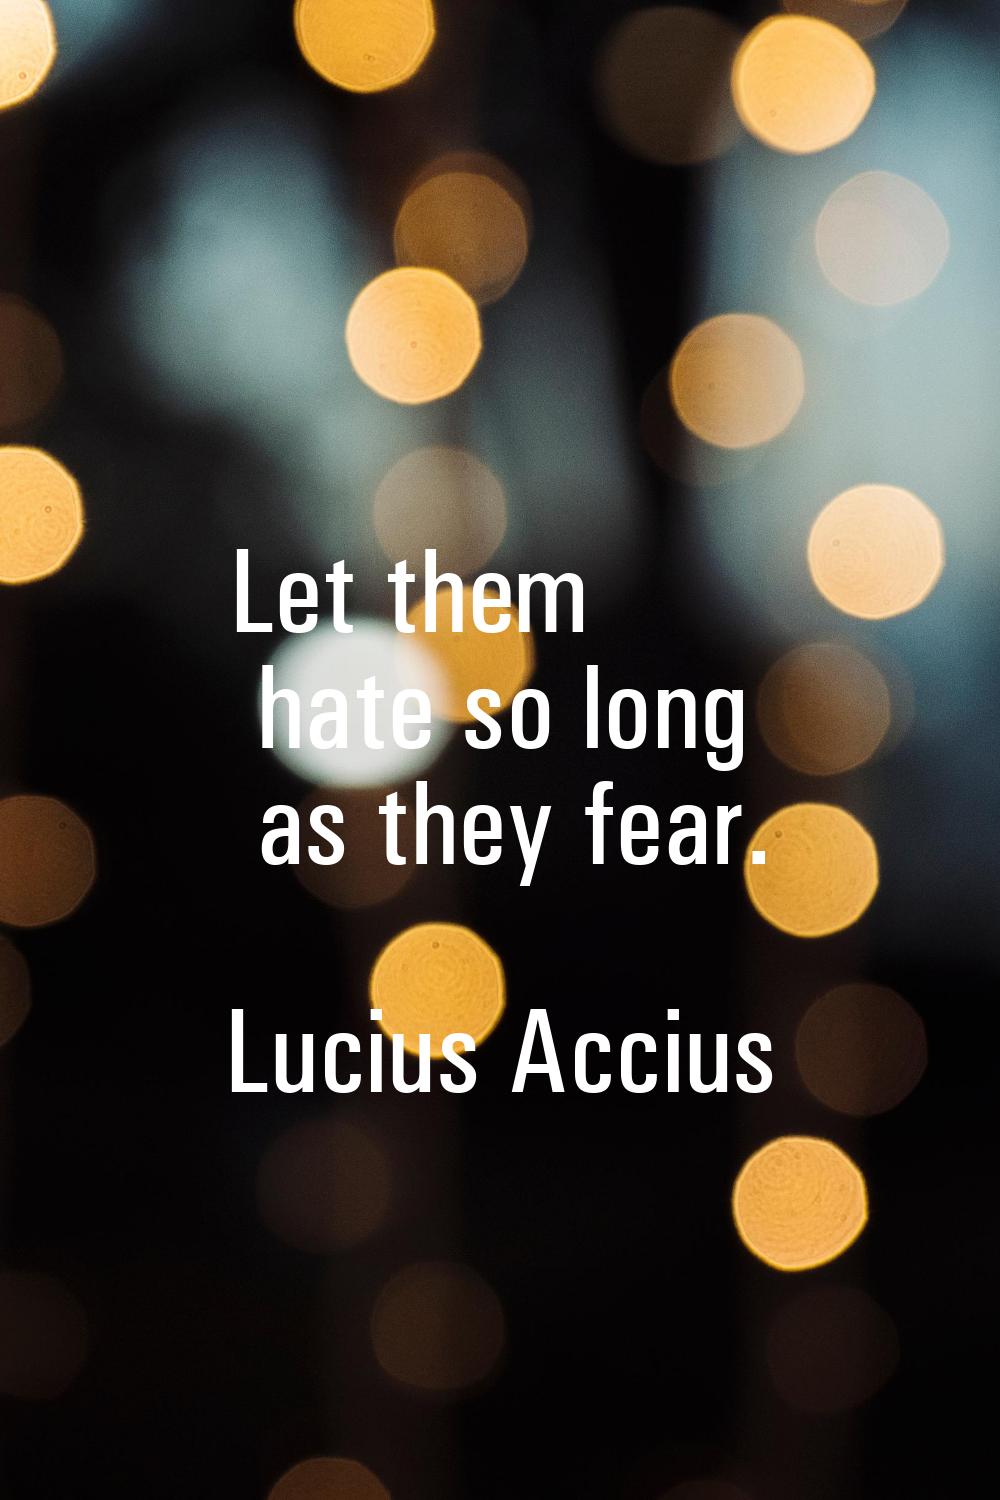 Let them hate so long as they fear.